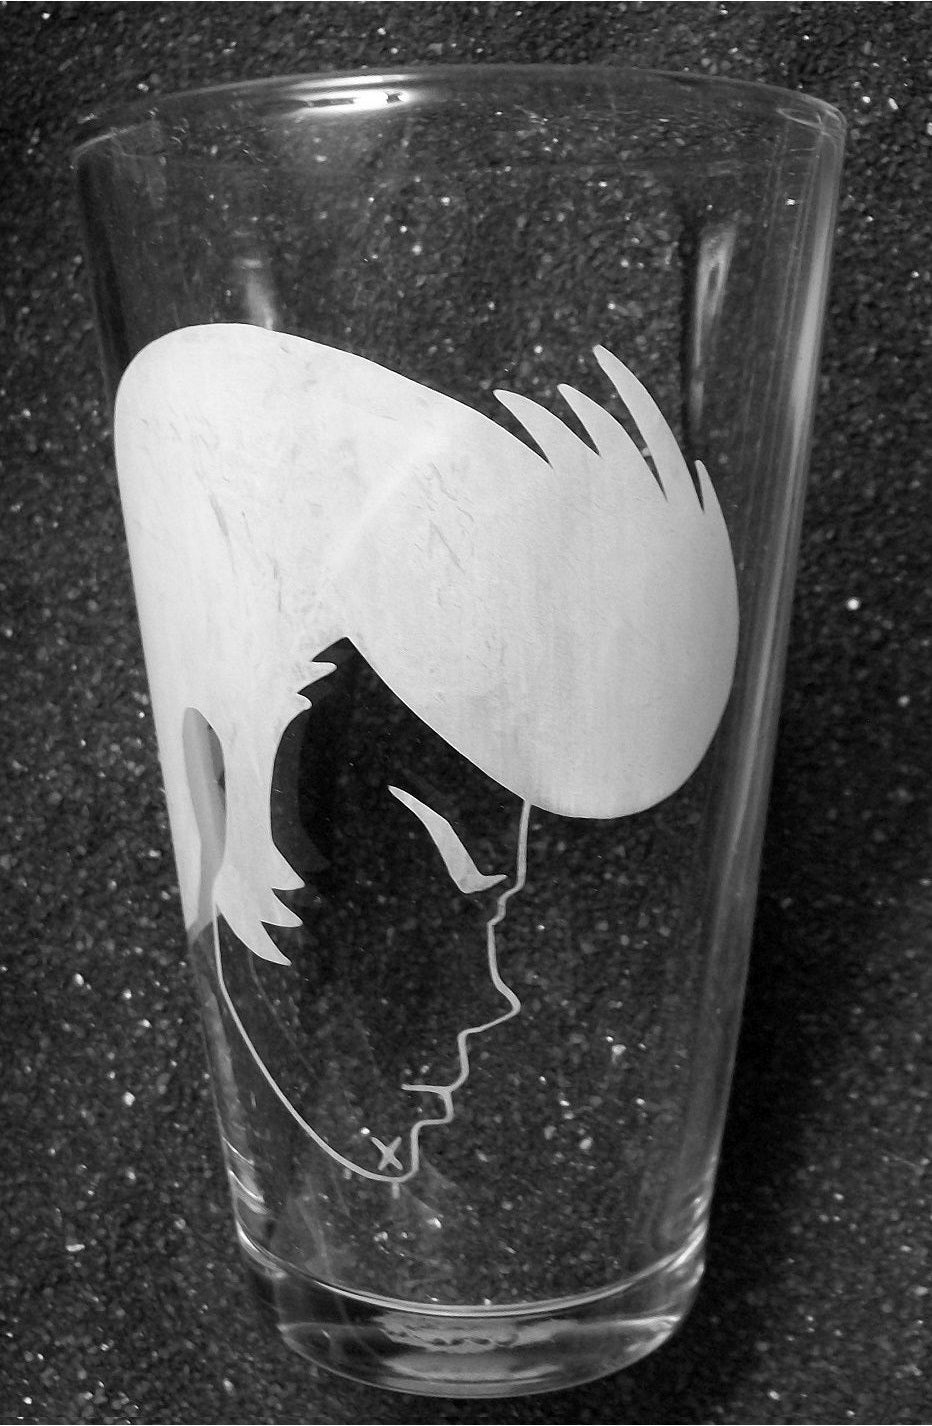 Space Dandy fanart etched pint glass beer tumbler cup